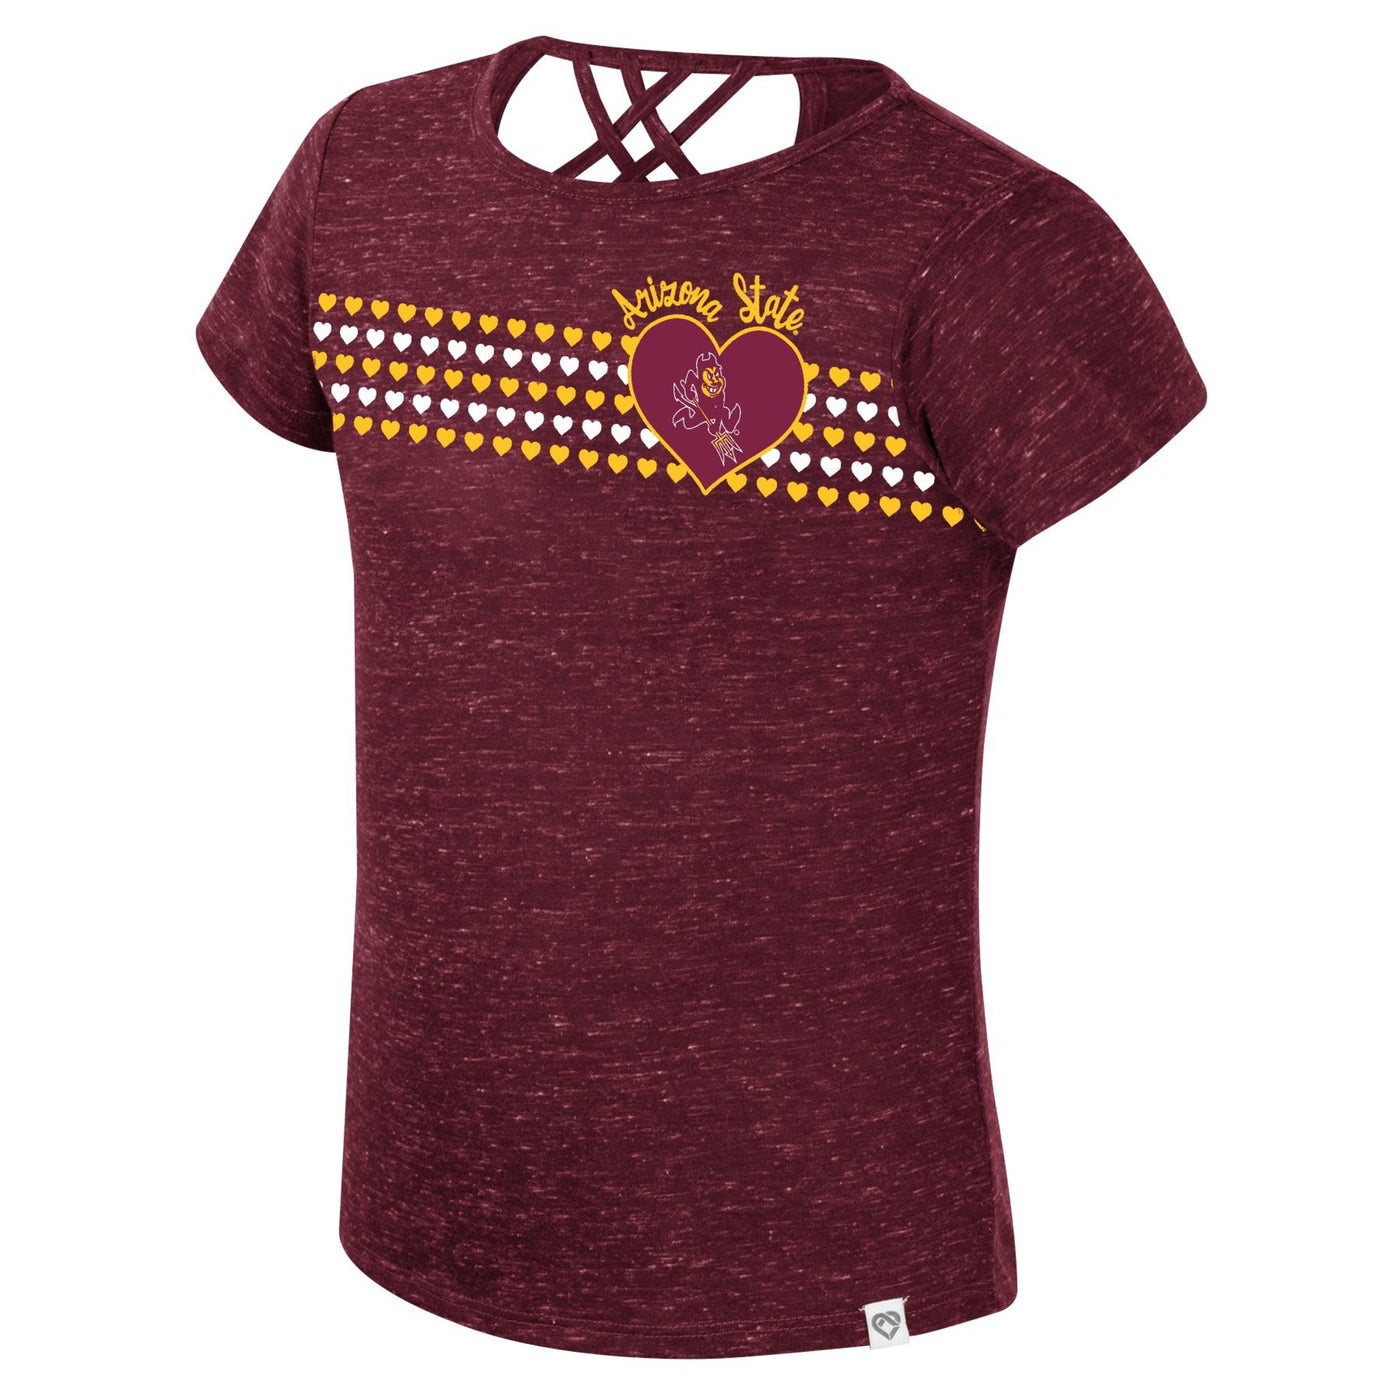 ASU toddler girls maroon t-shirt with 5 stripes of small hearts alternating between gold and white. A heart outline with the sparky mascot inside and above is the cursive gold text 